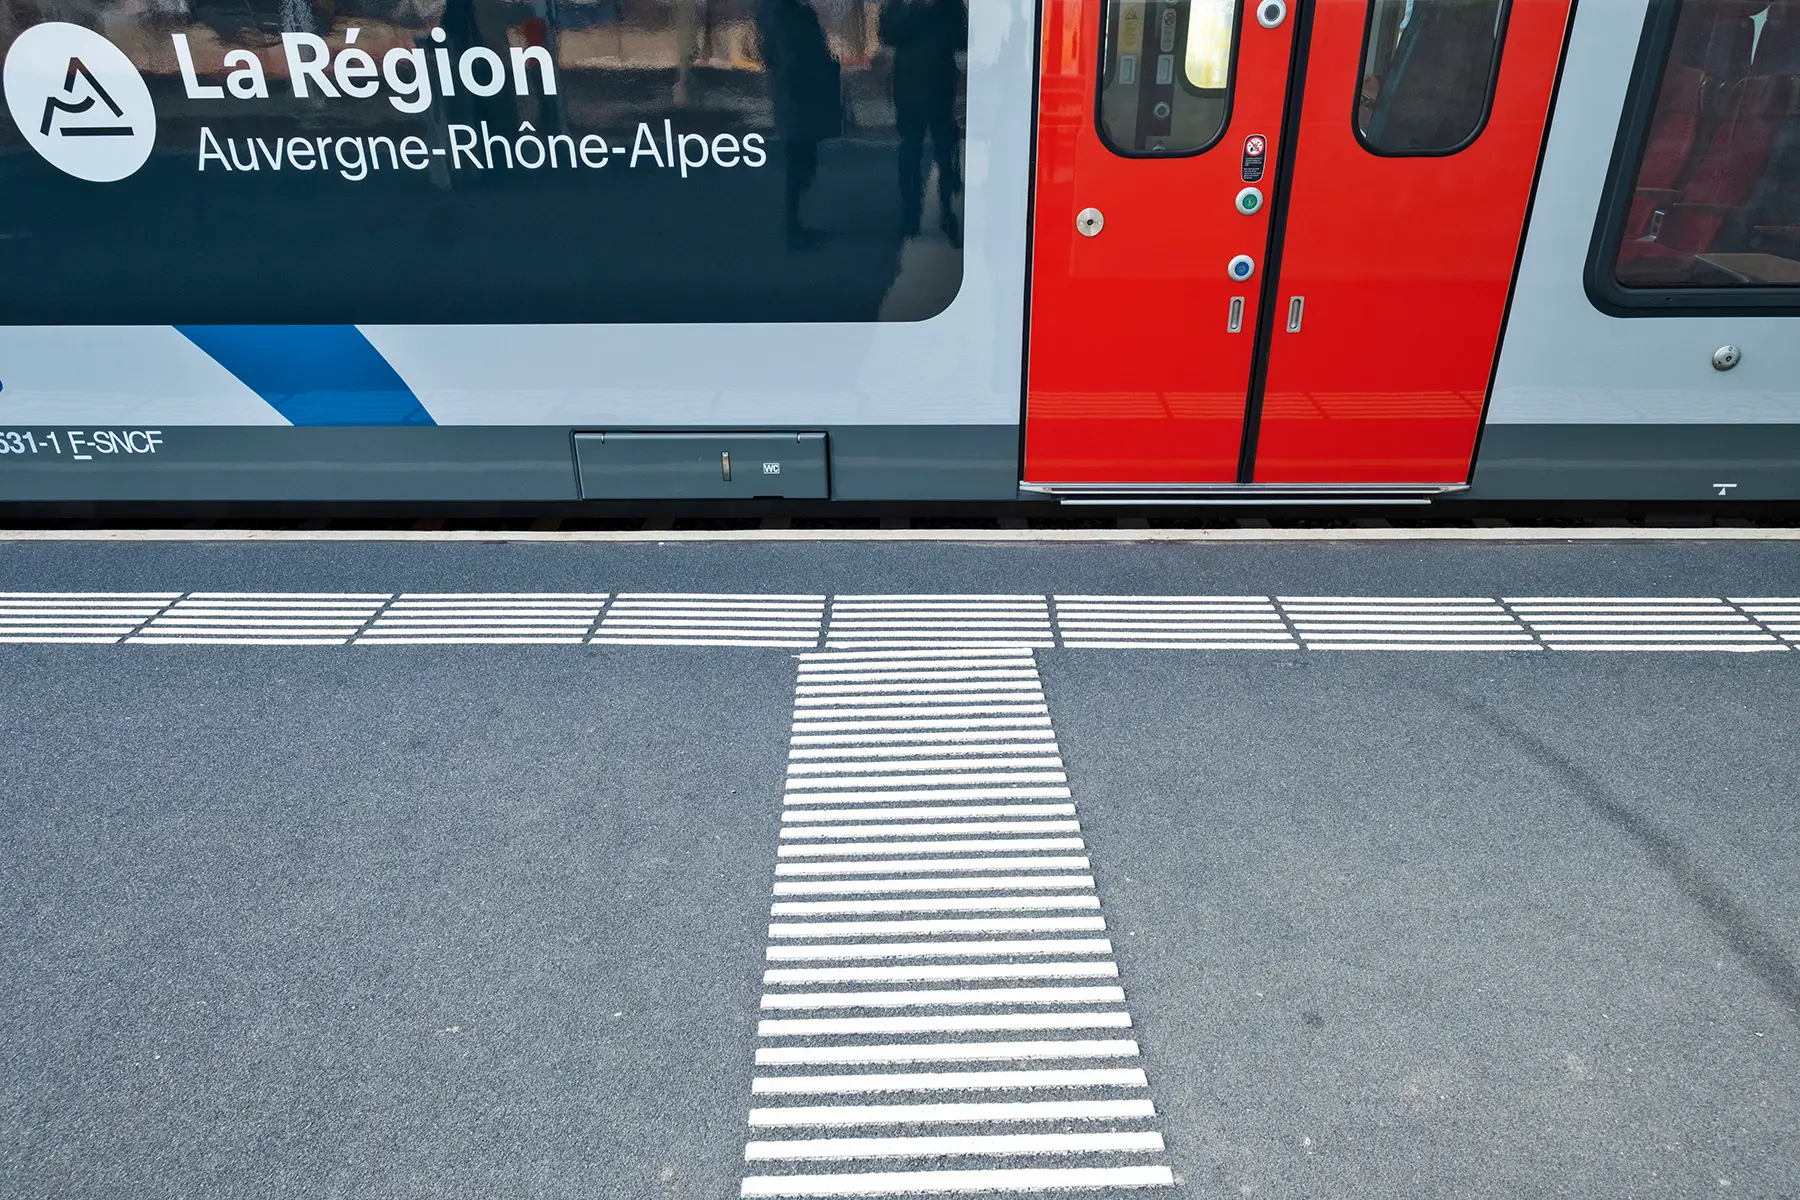 Tactile paving at a train station in Geneva